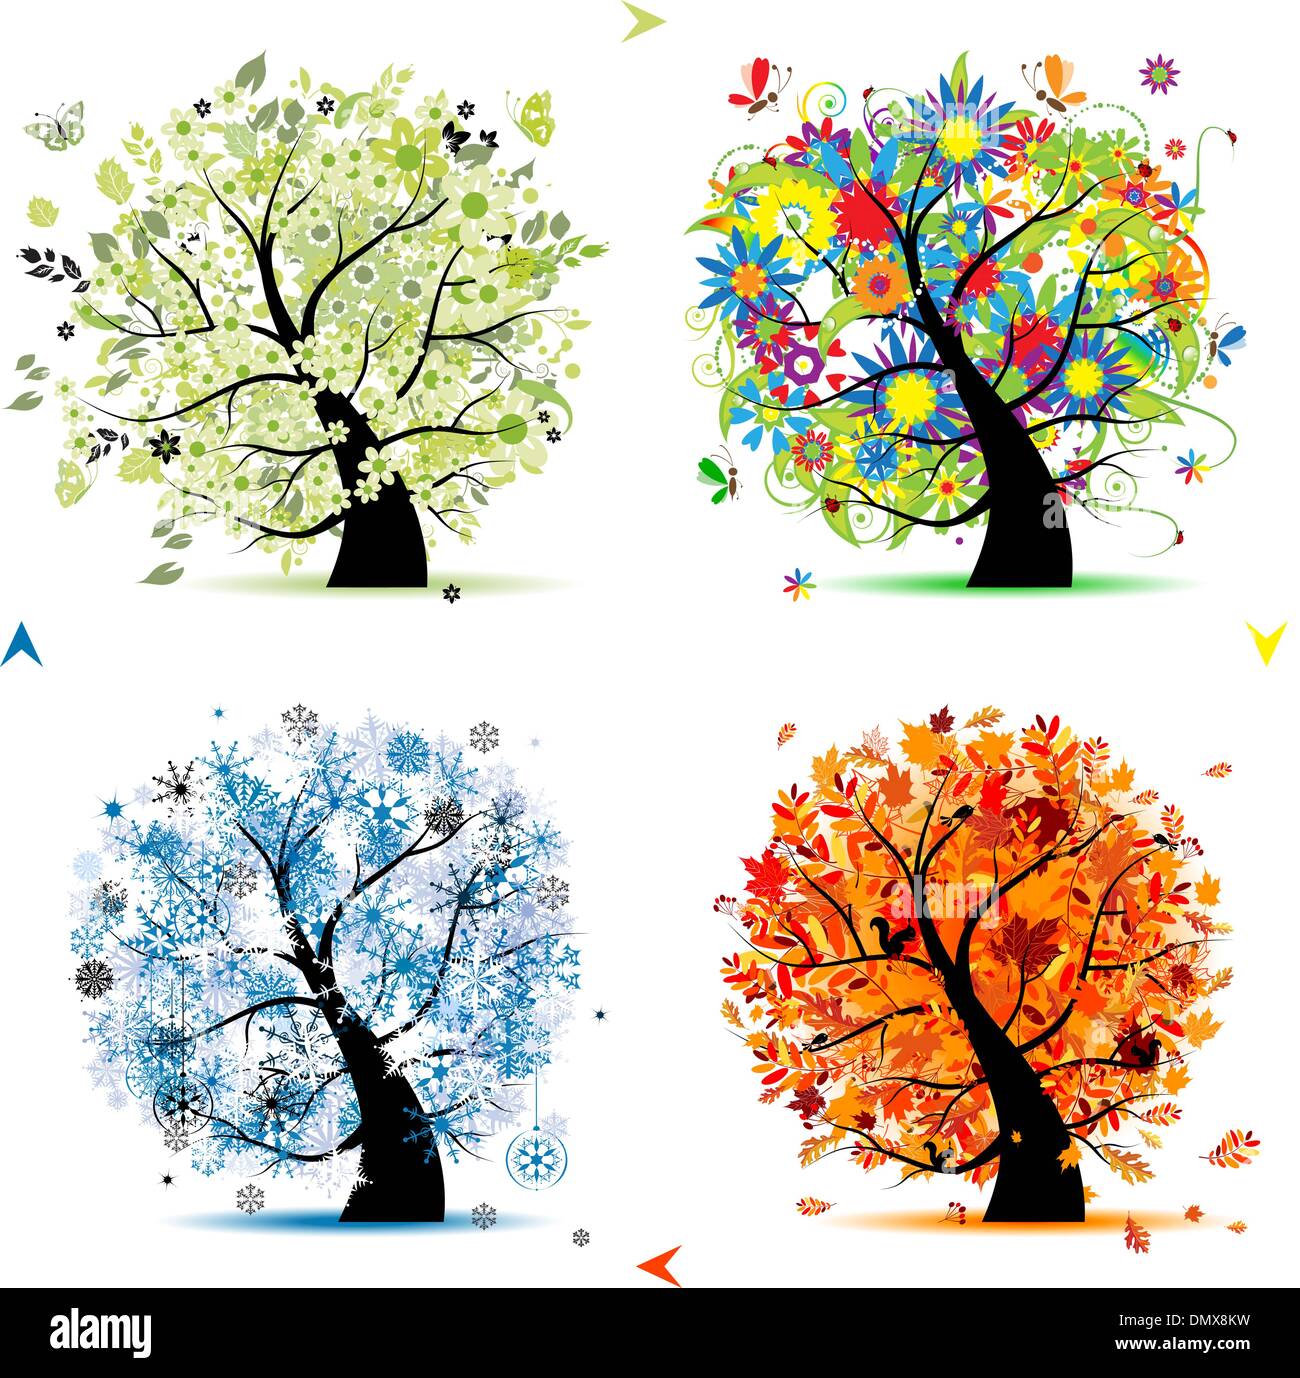 Four seasons - spring, summer, autumn, winter. Art tree beautiful for your design Stock Vector